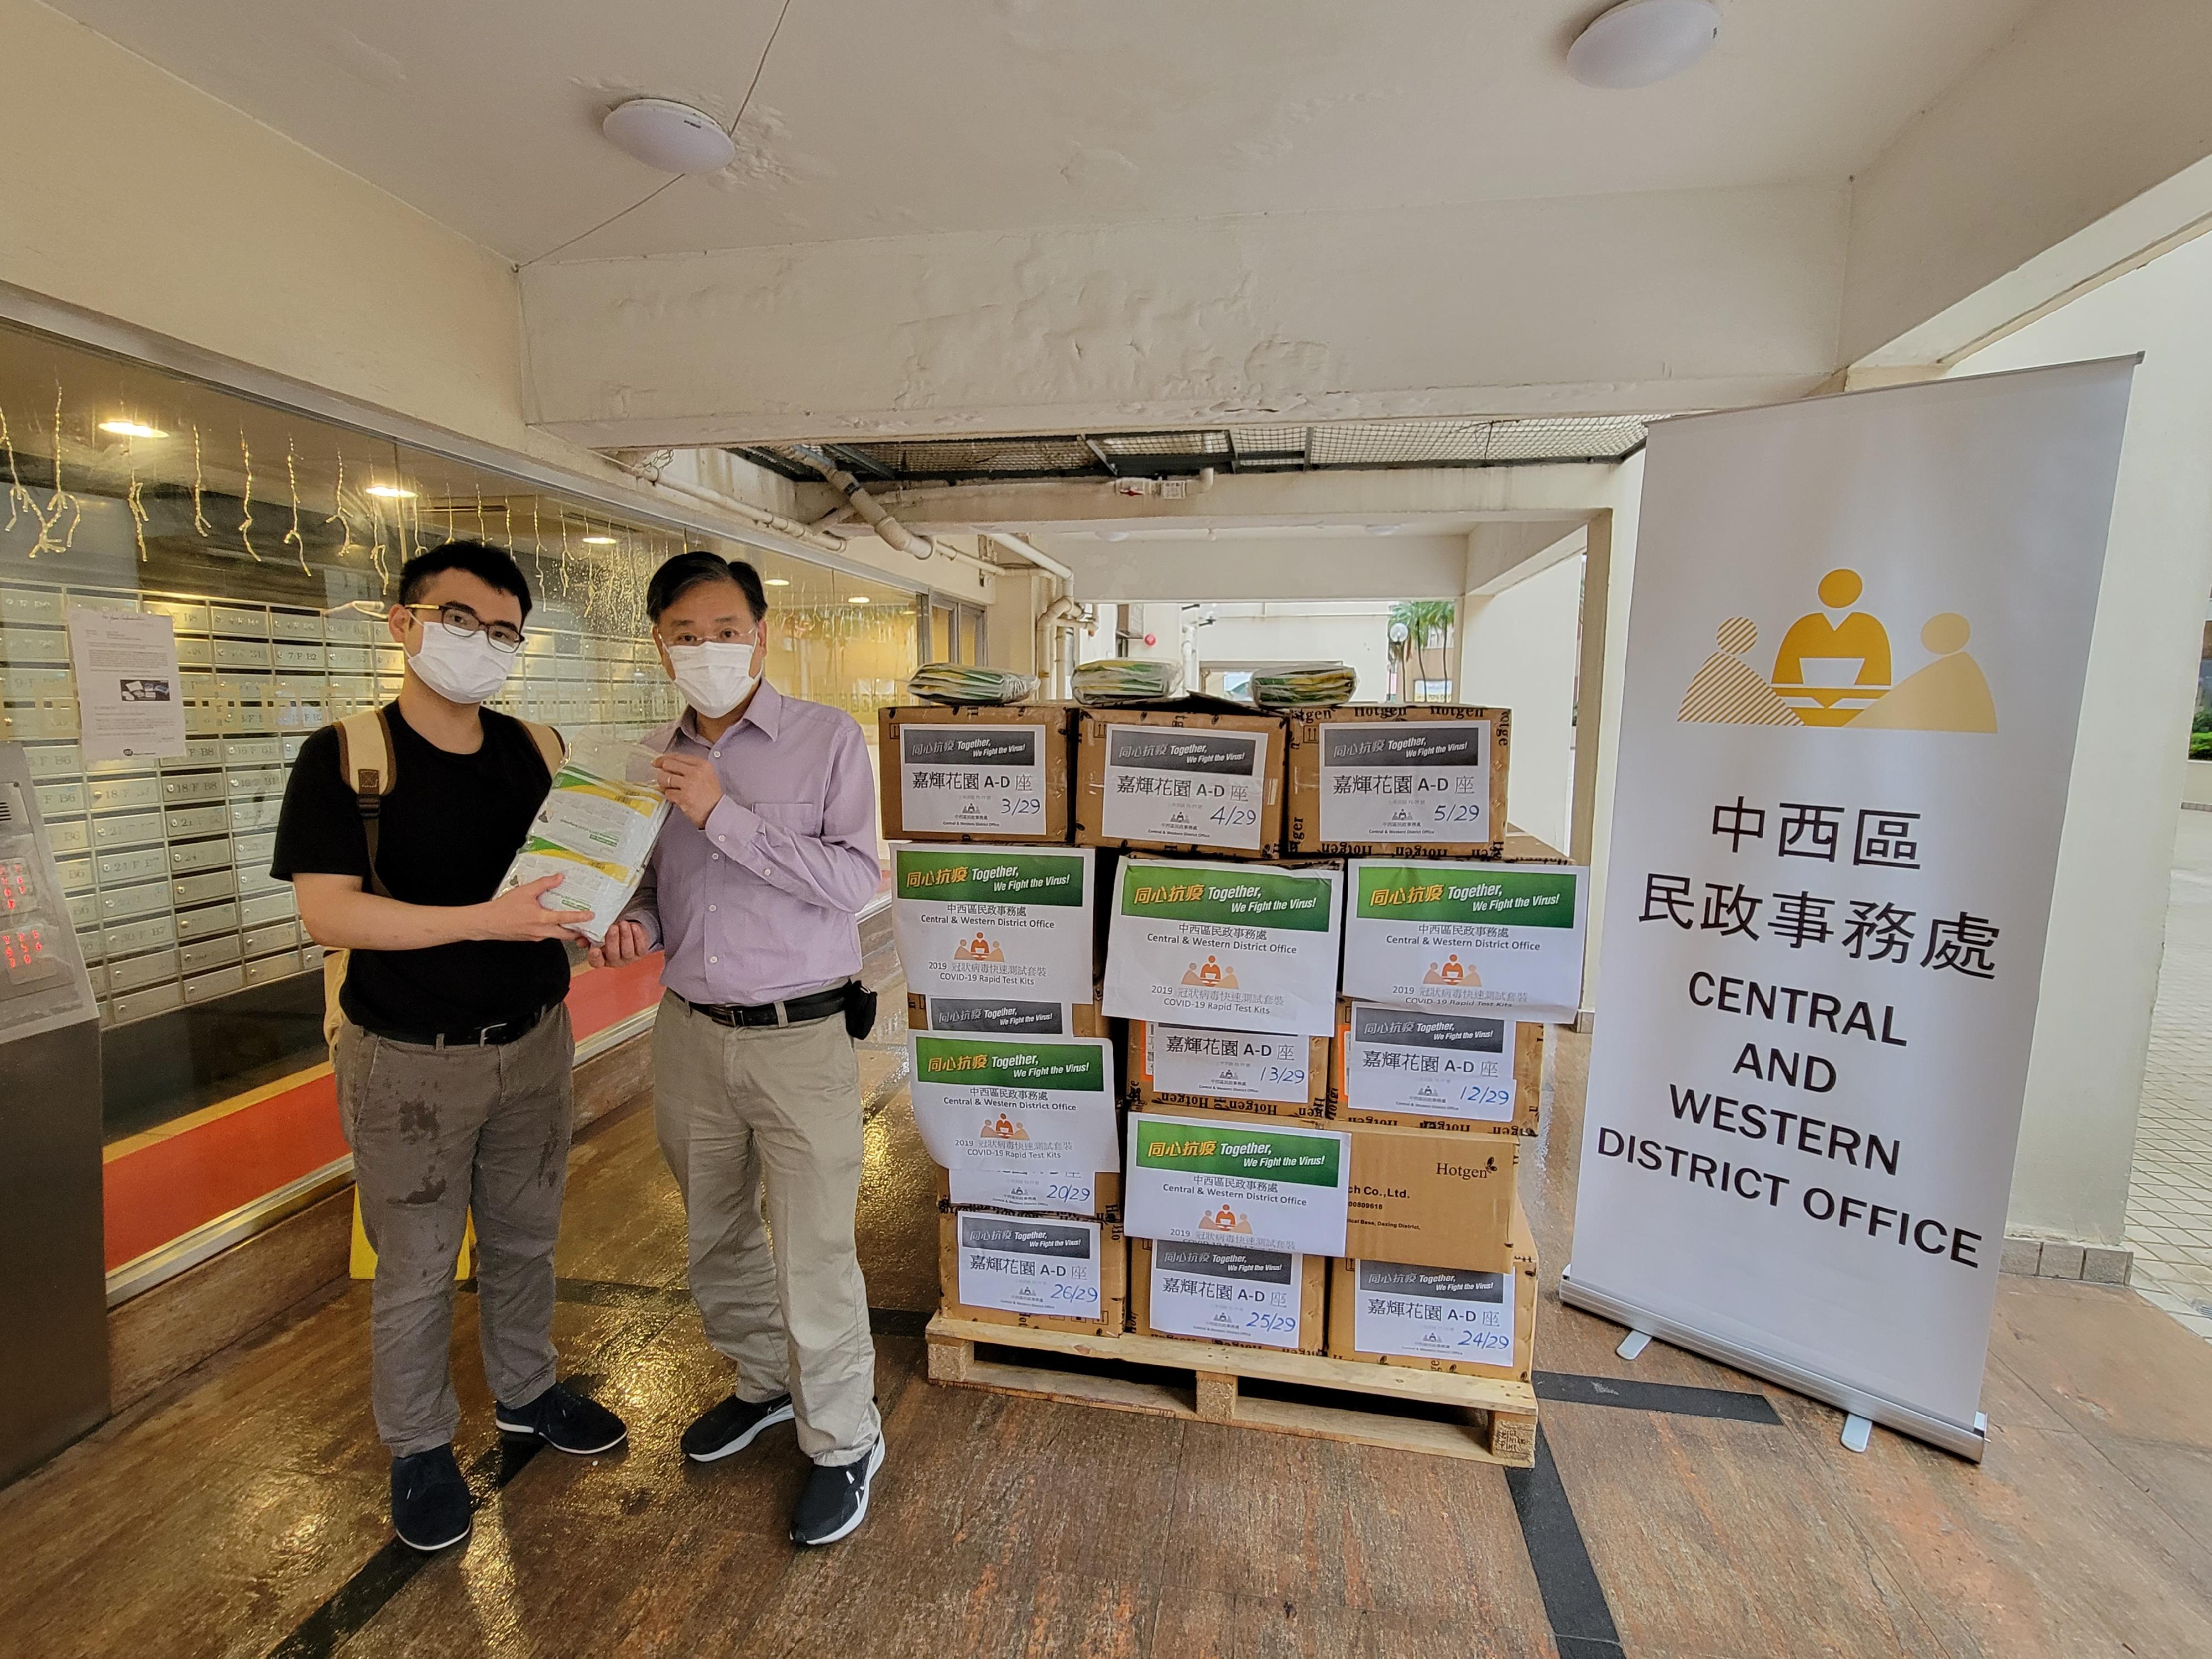 The Central and Western District Office today (May 13) distributed COVID-19 rapid test kits to households, cleansing workers and property management staff living and working in Smithfield Terrace for voluntary testing through the property management company and the owners' corporation.